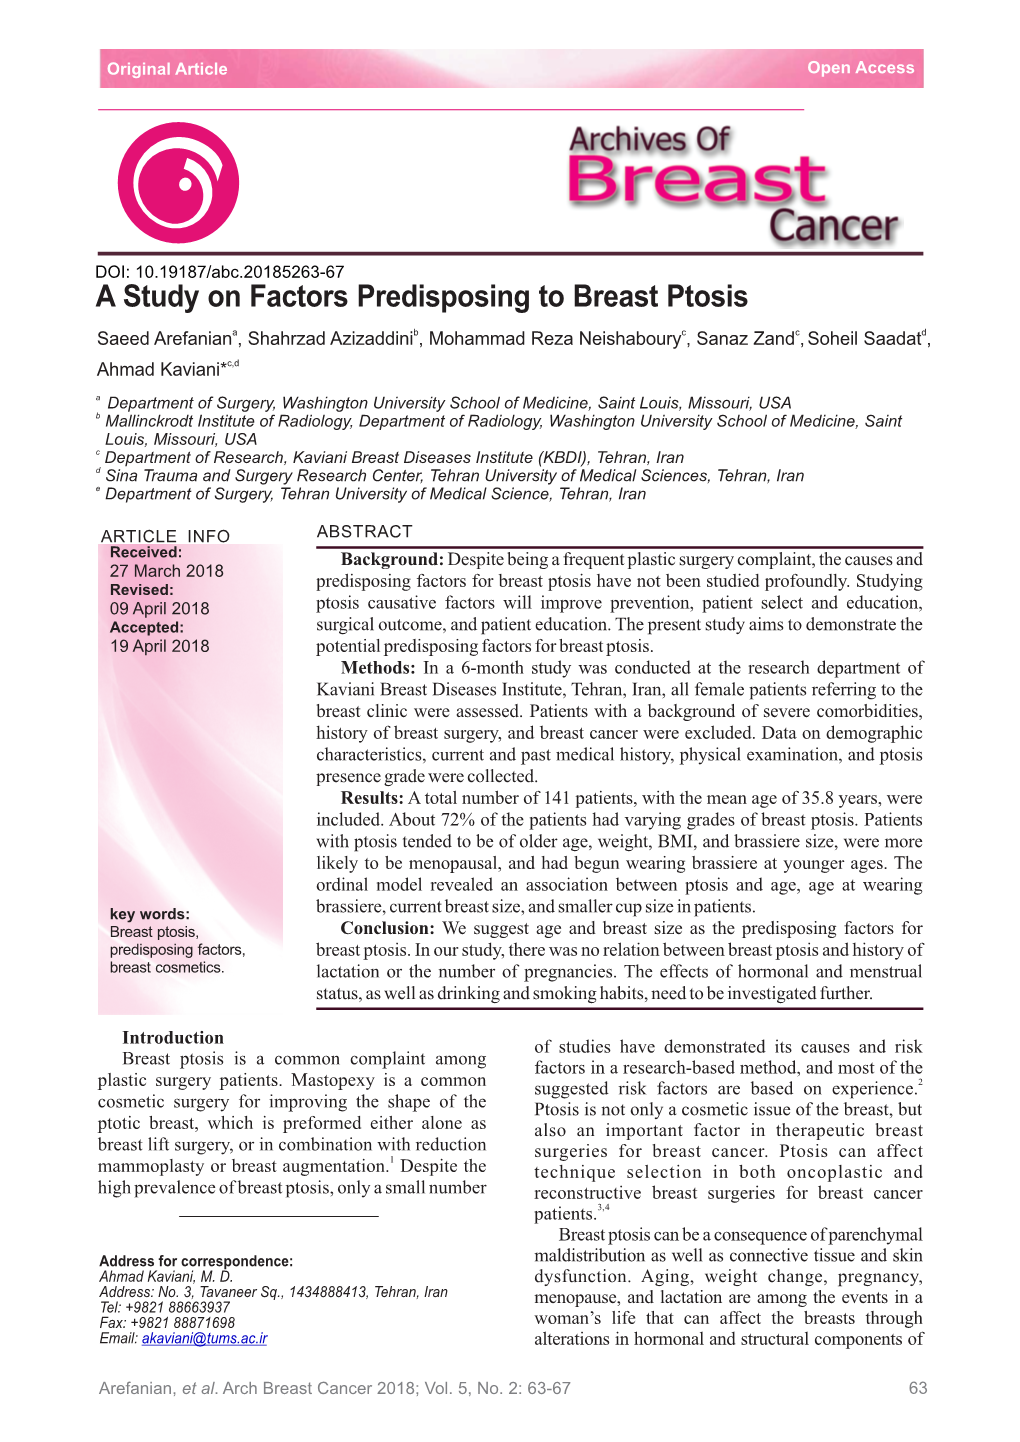 A Study on Factors Predisposing to Breast Ptosis